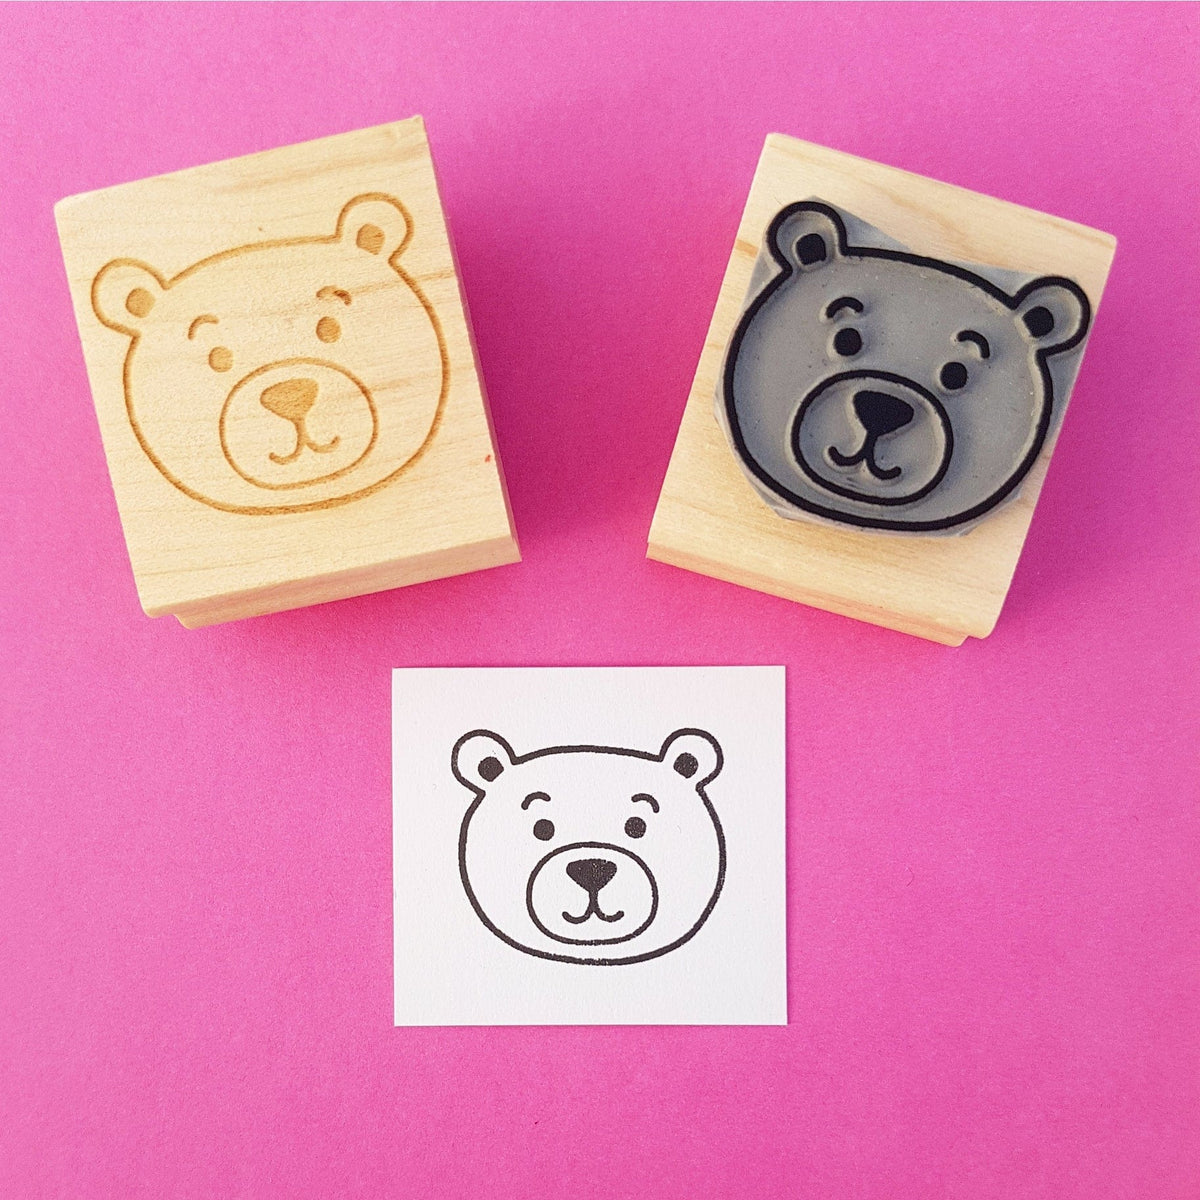 Skull and Cross Buns Teddy Bear Rubber Stamp